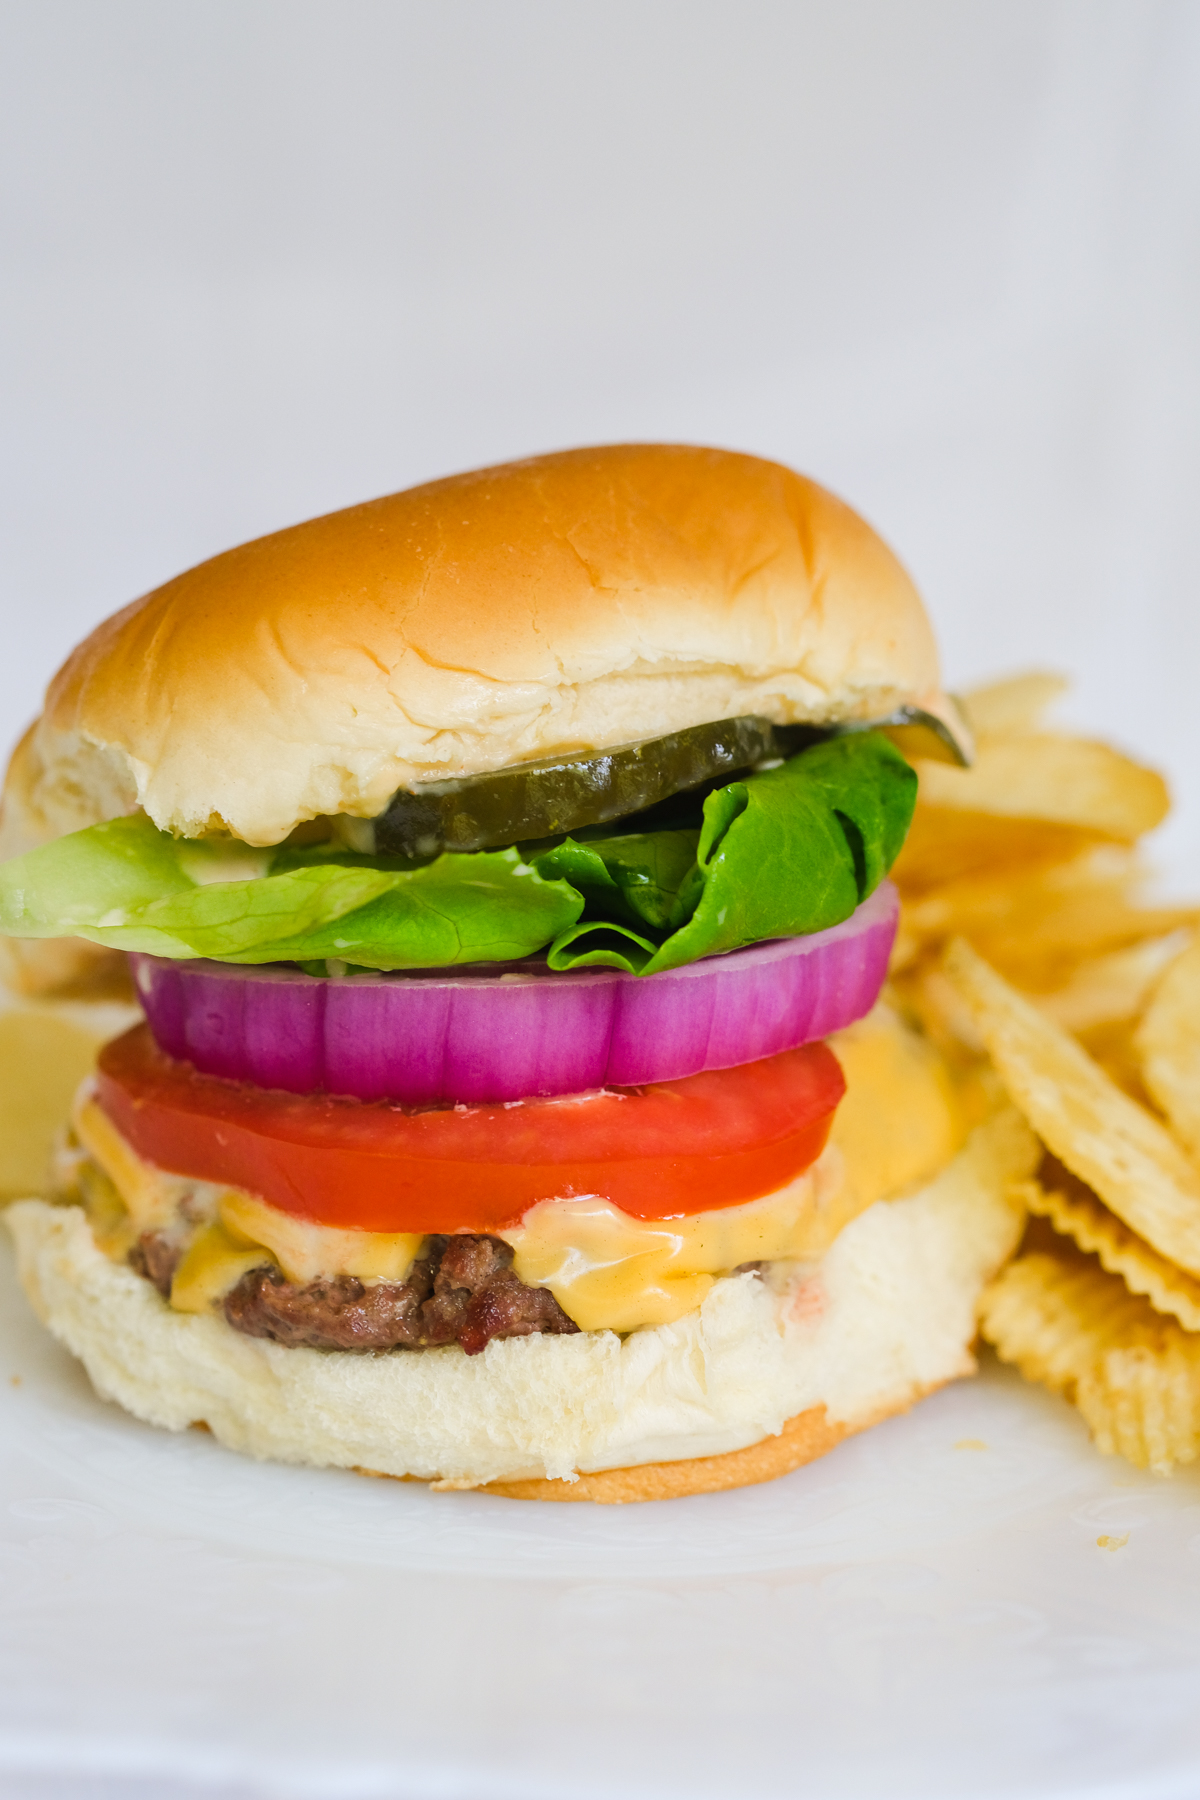 classic cheeseburger with chips on a plate